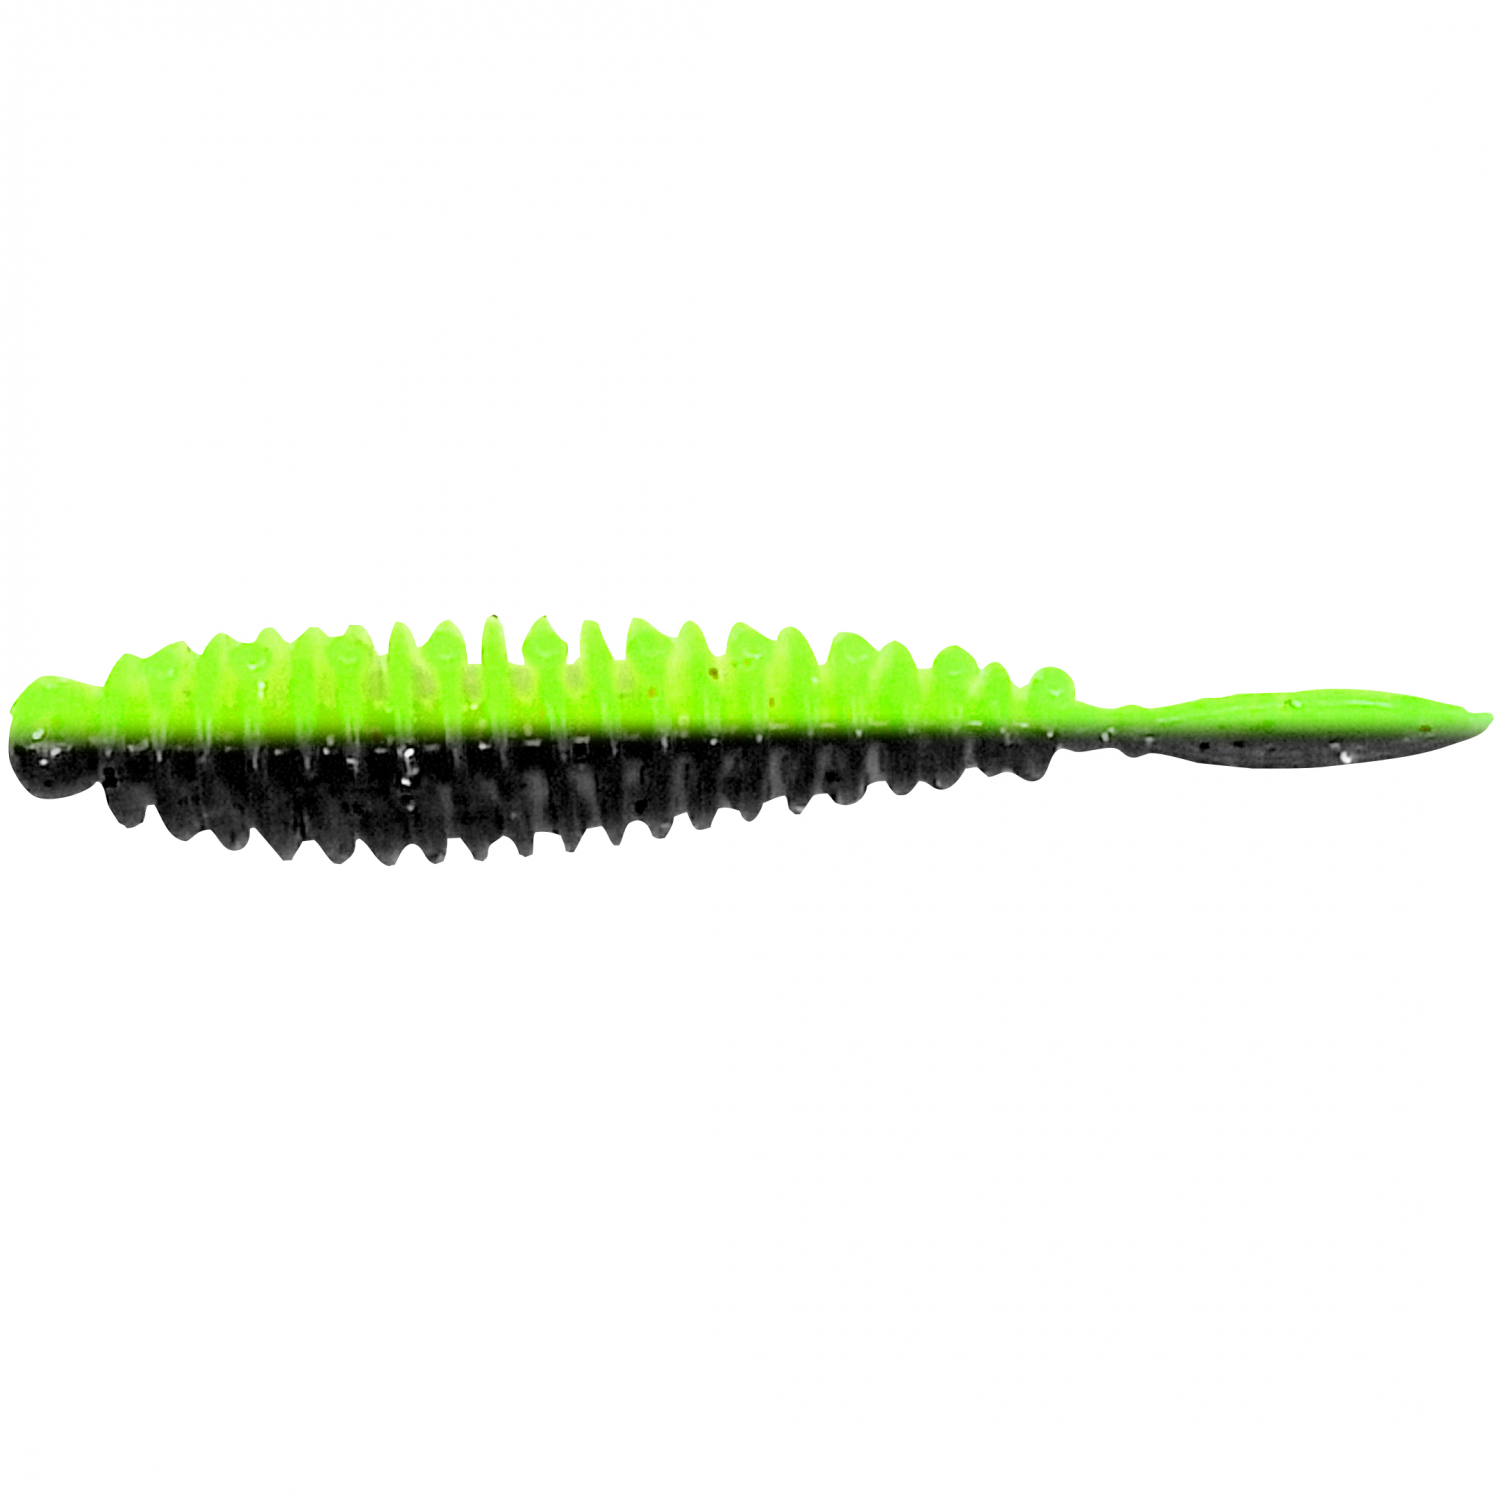 OGP Soft Lures Fat Worm Garlic (Black Chartreuse) at low prices